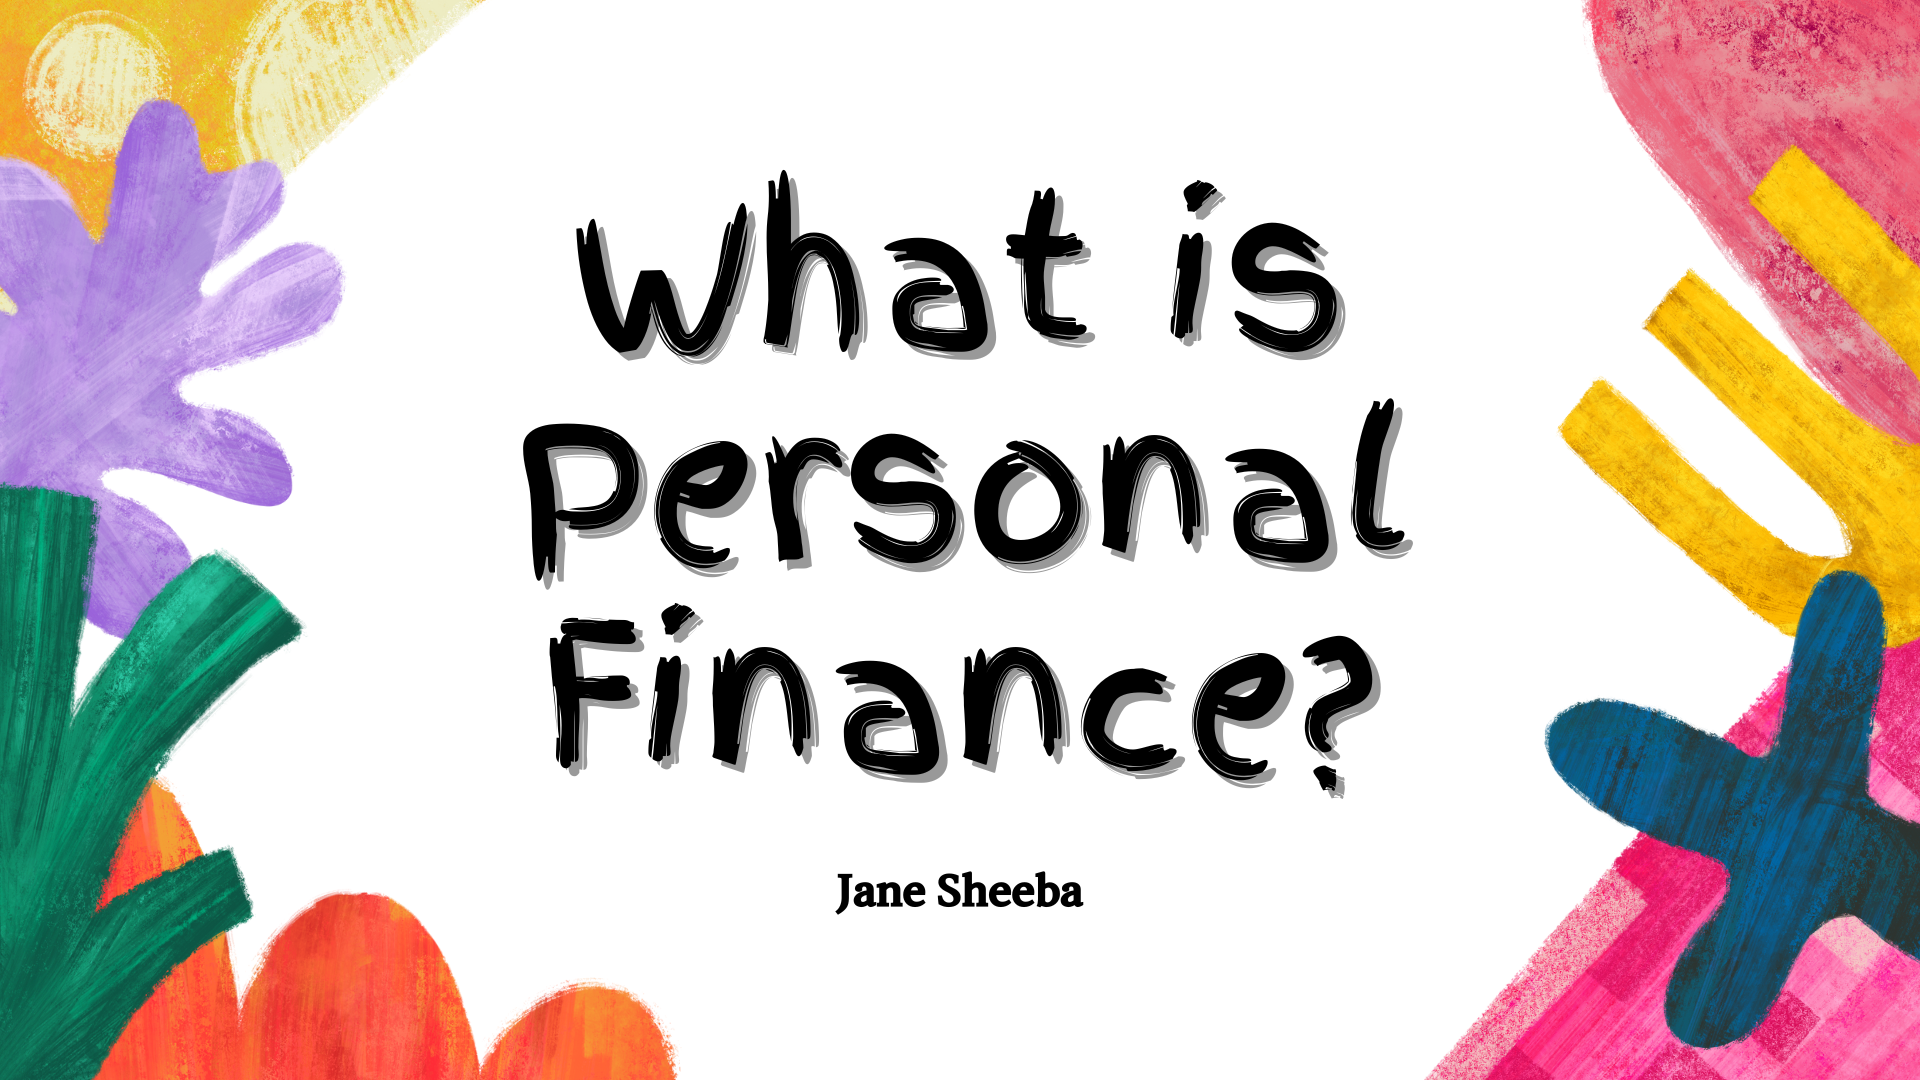 What is personal finance